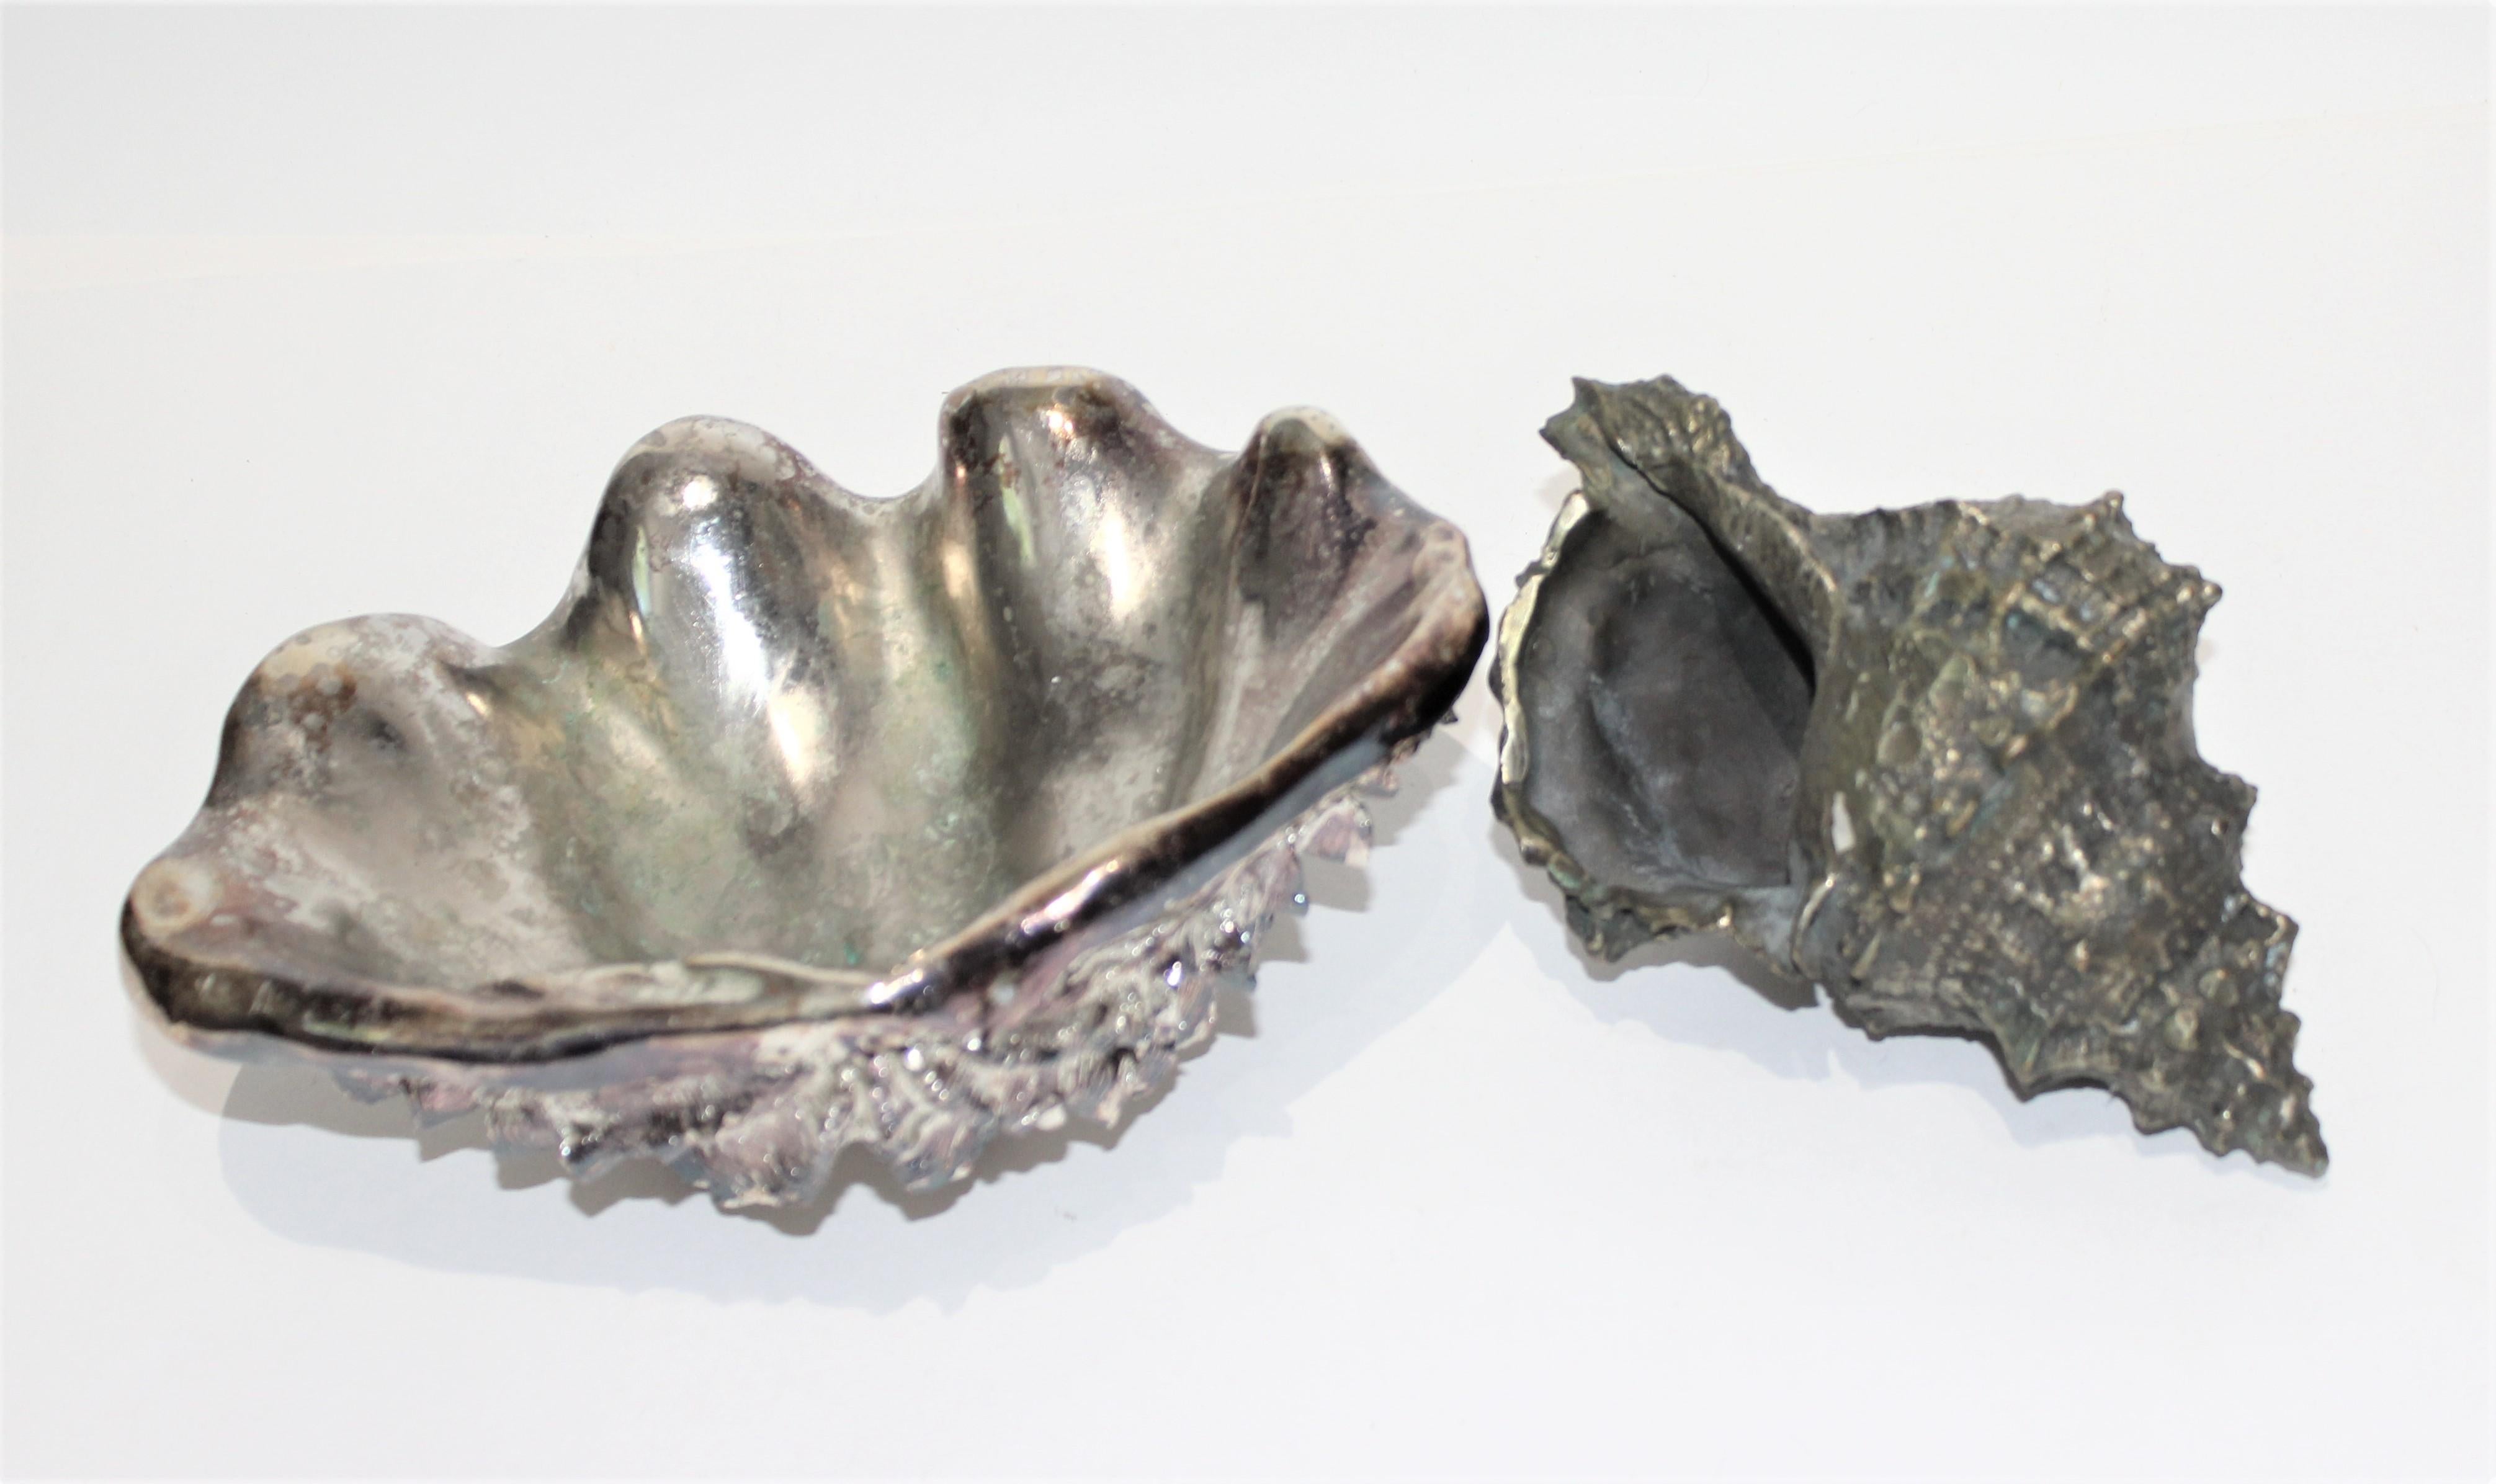 Shell Sculptures Ribbed Clam and Conch - set of 2 from a Palm Beach estate

The ribbed clam is made from heavy resin material and appears to have been used as a luxe soap dish.
The snail conch is made of metai.

Clam 8